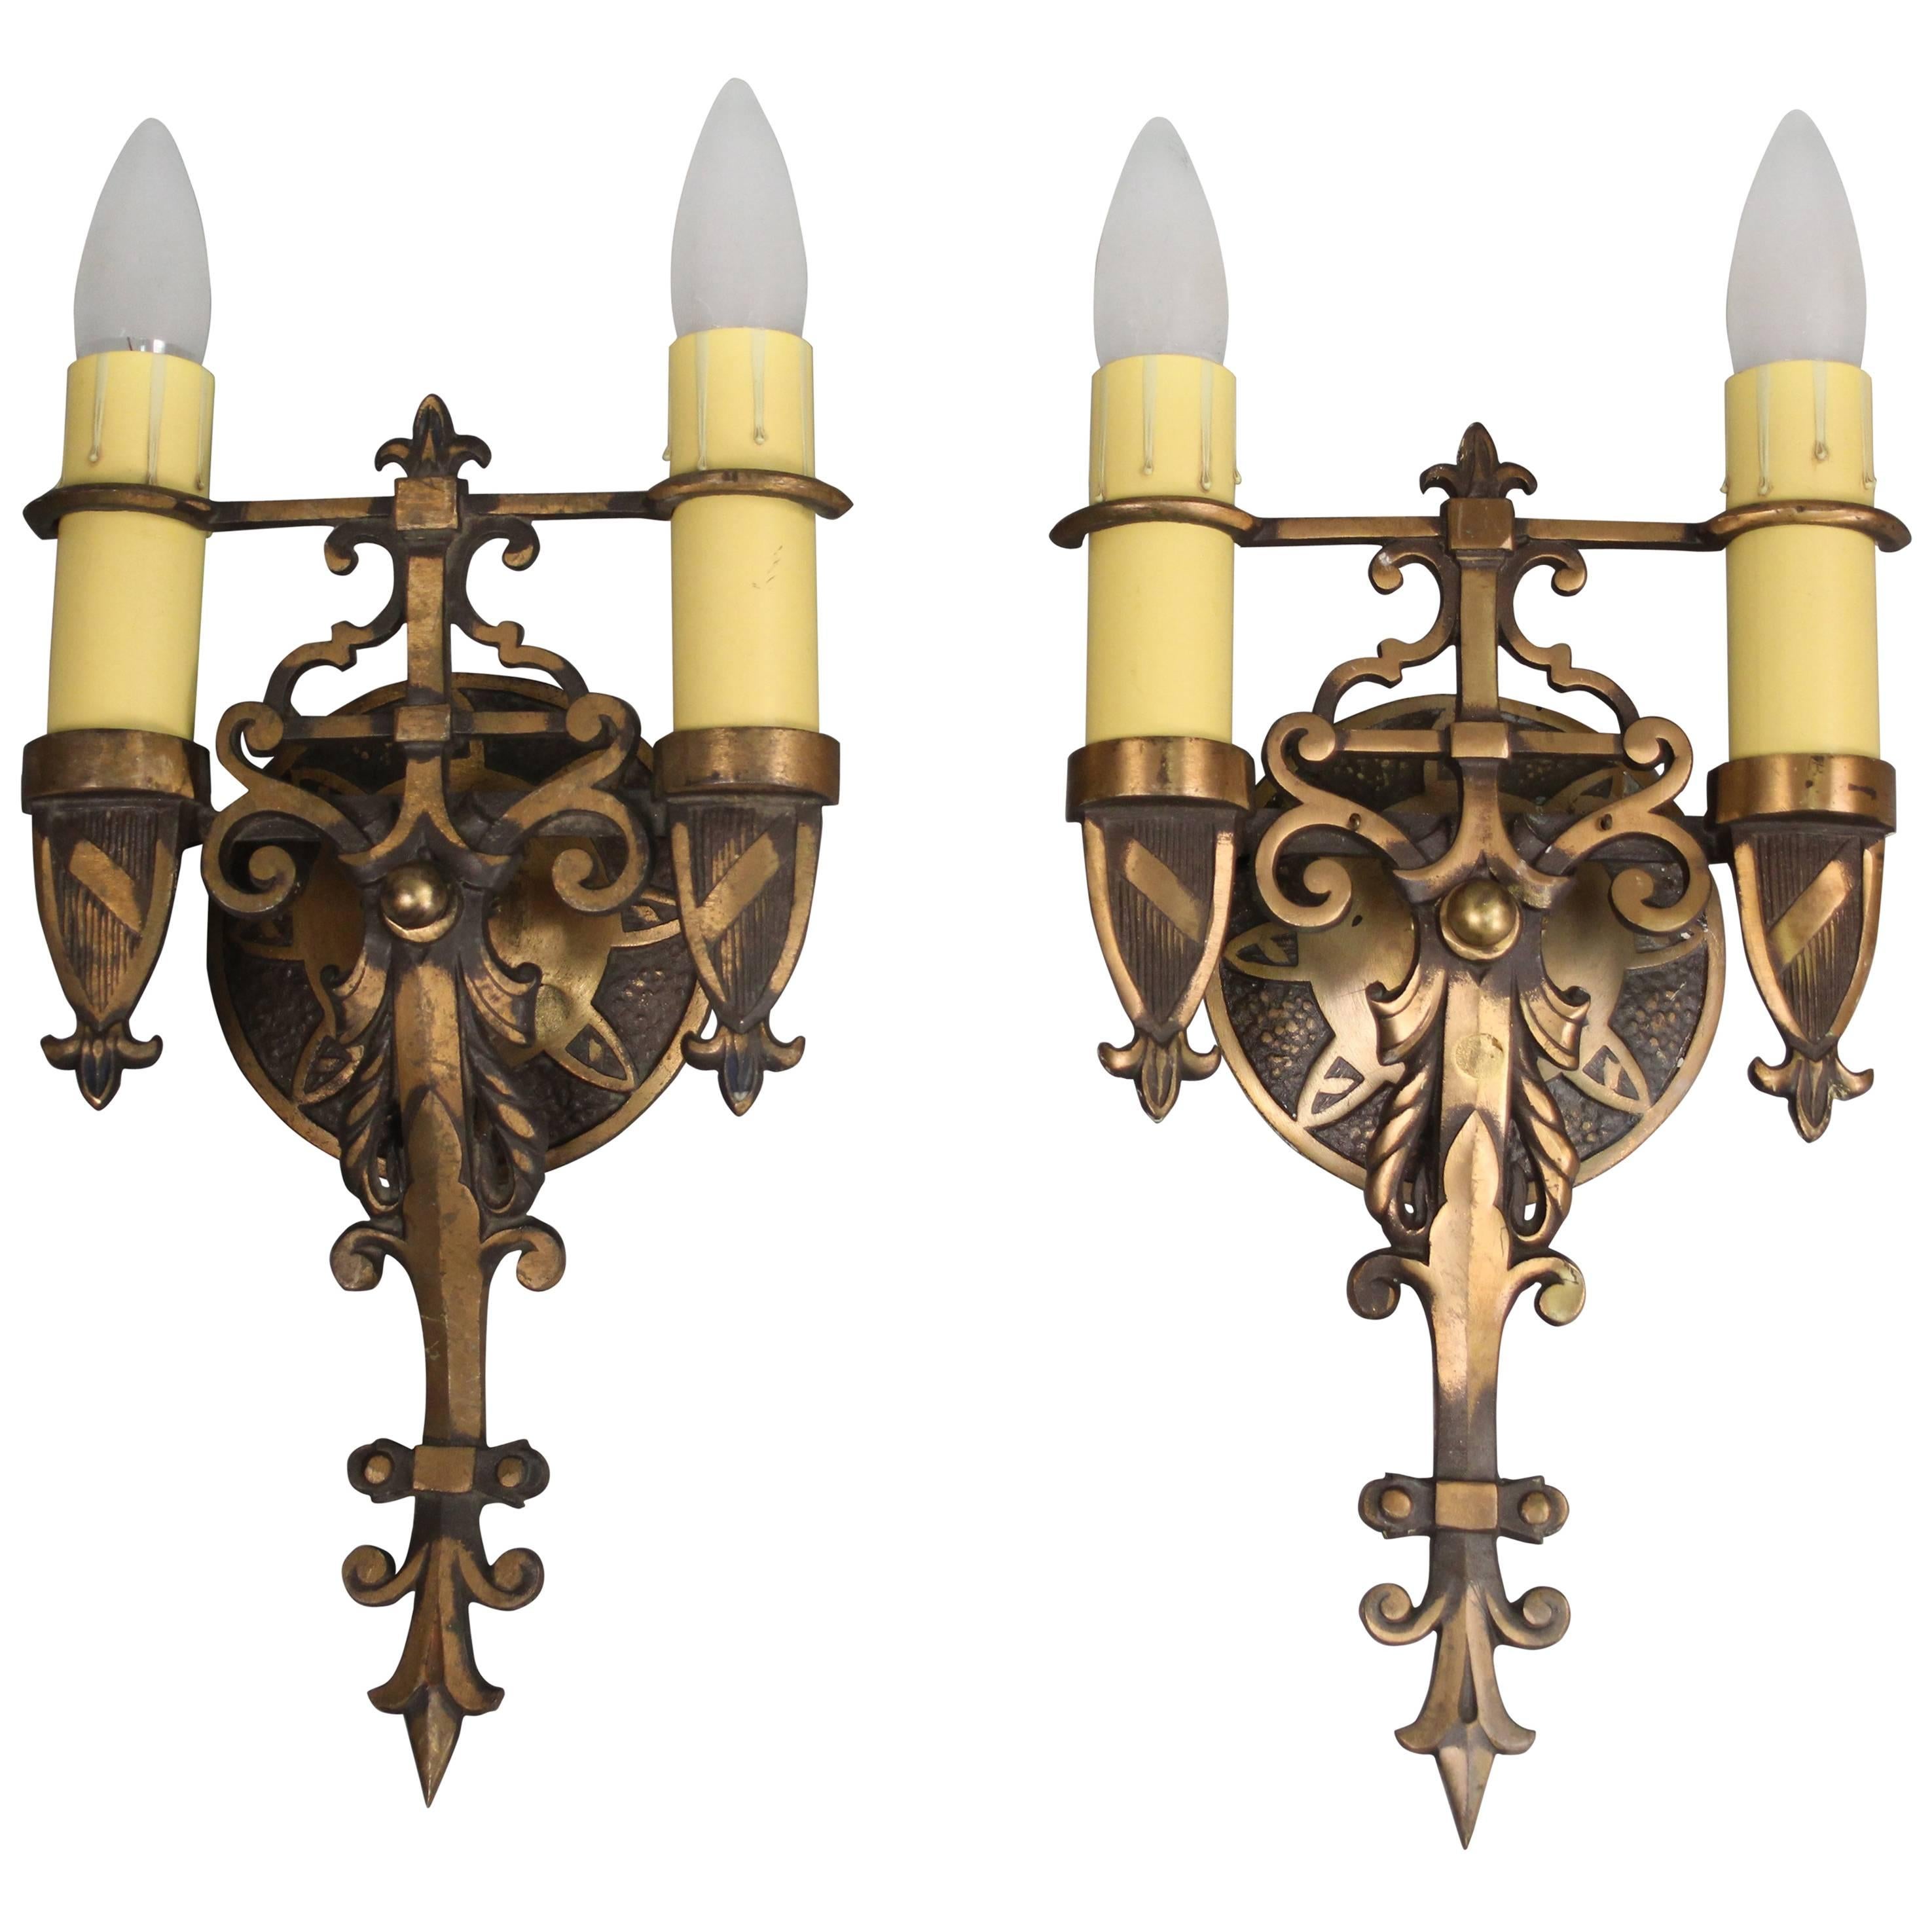 Pair of Antique Spanish Revival Brass Sconces circa 1920s with Shield Motif